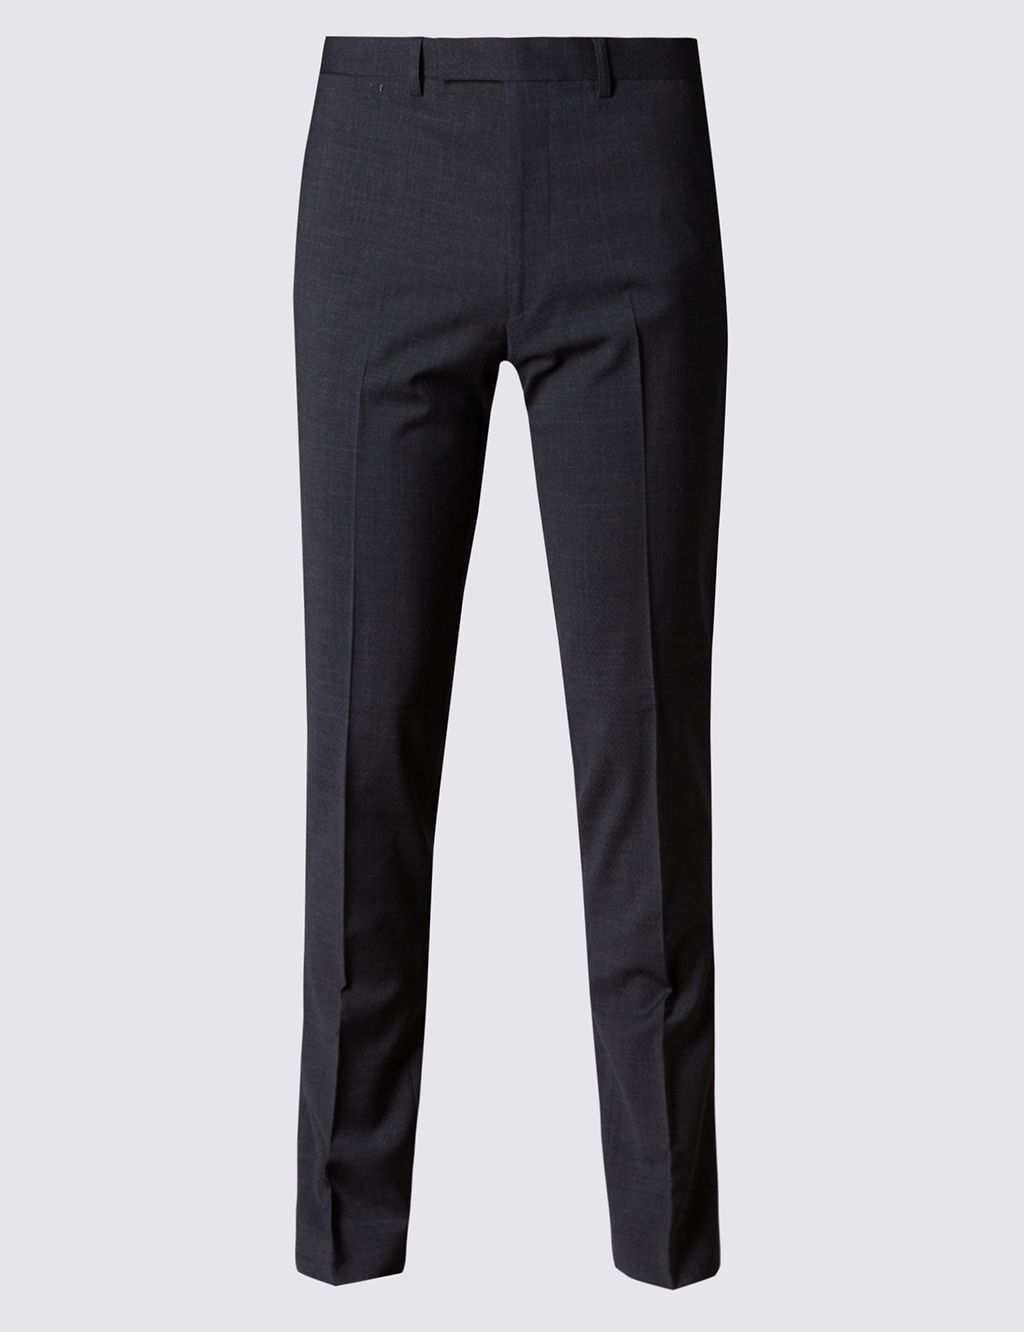 Charcoal Textured Modern Slim Fit Trousers 1 of 4